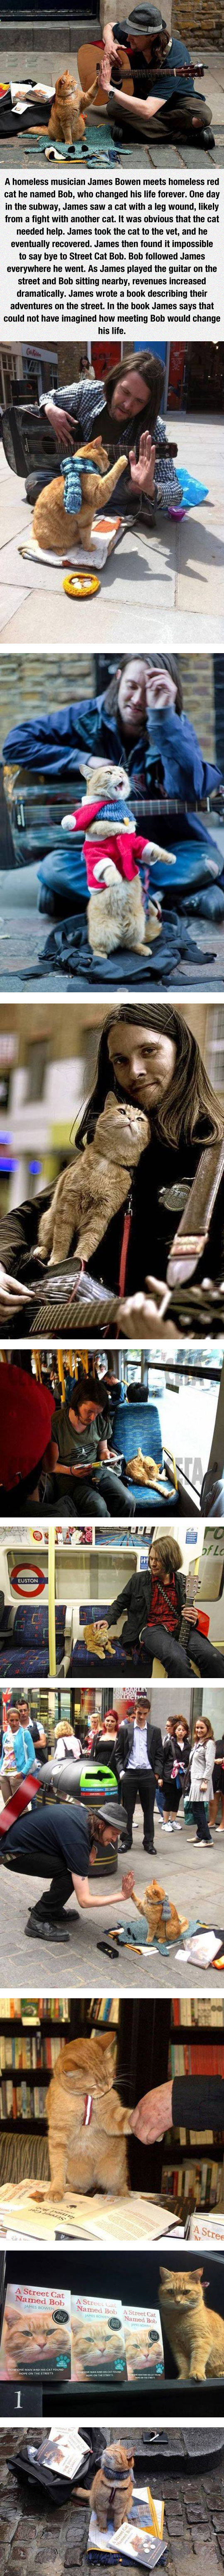 The Homeless Musician And His Cat